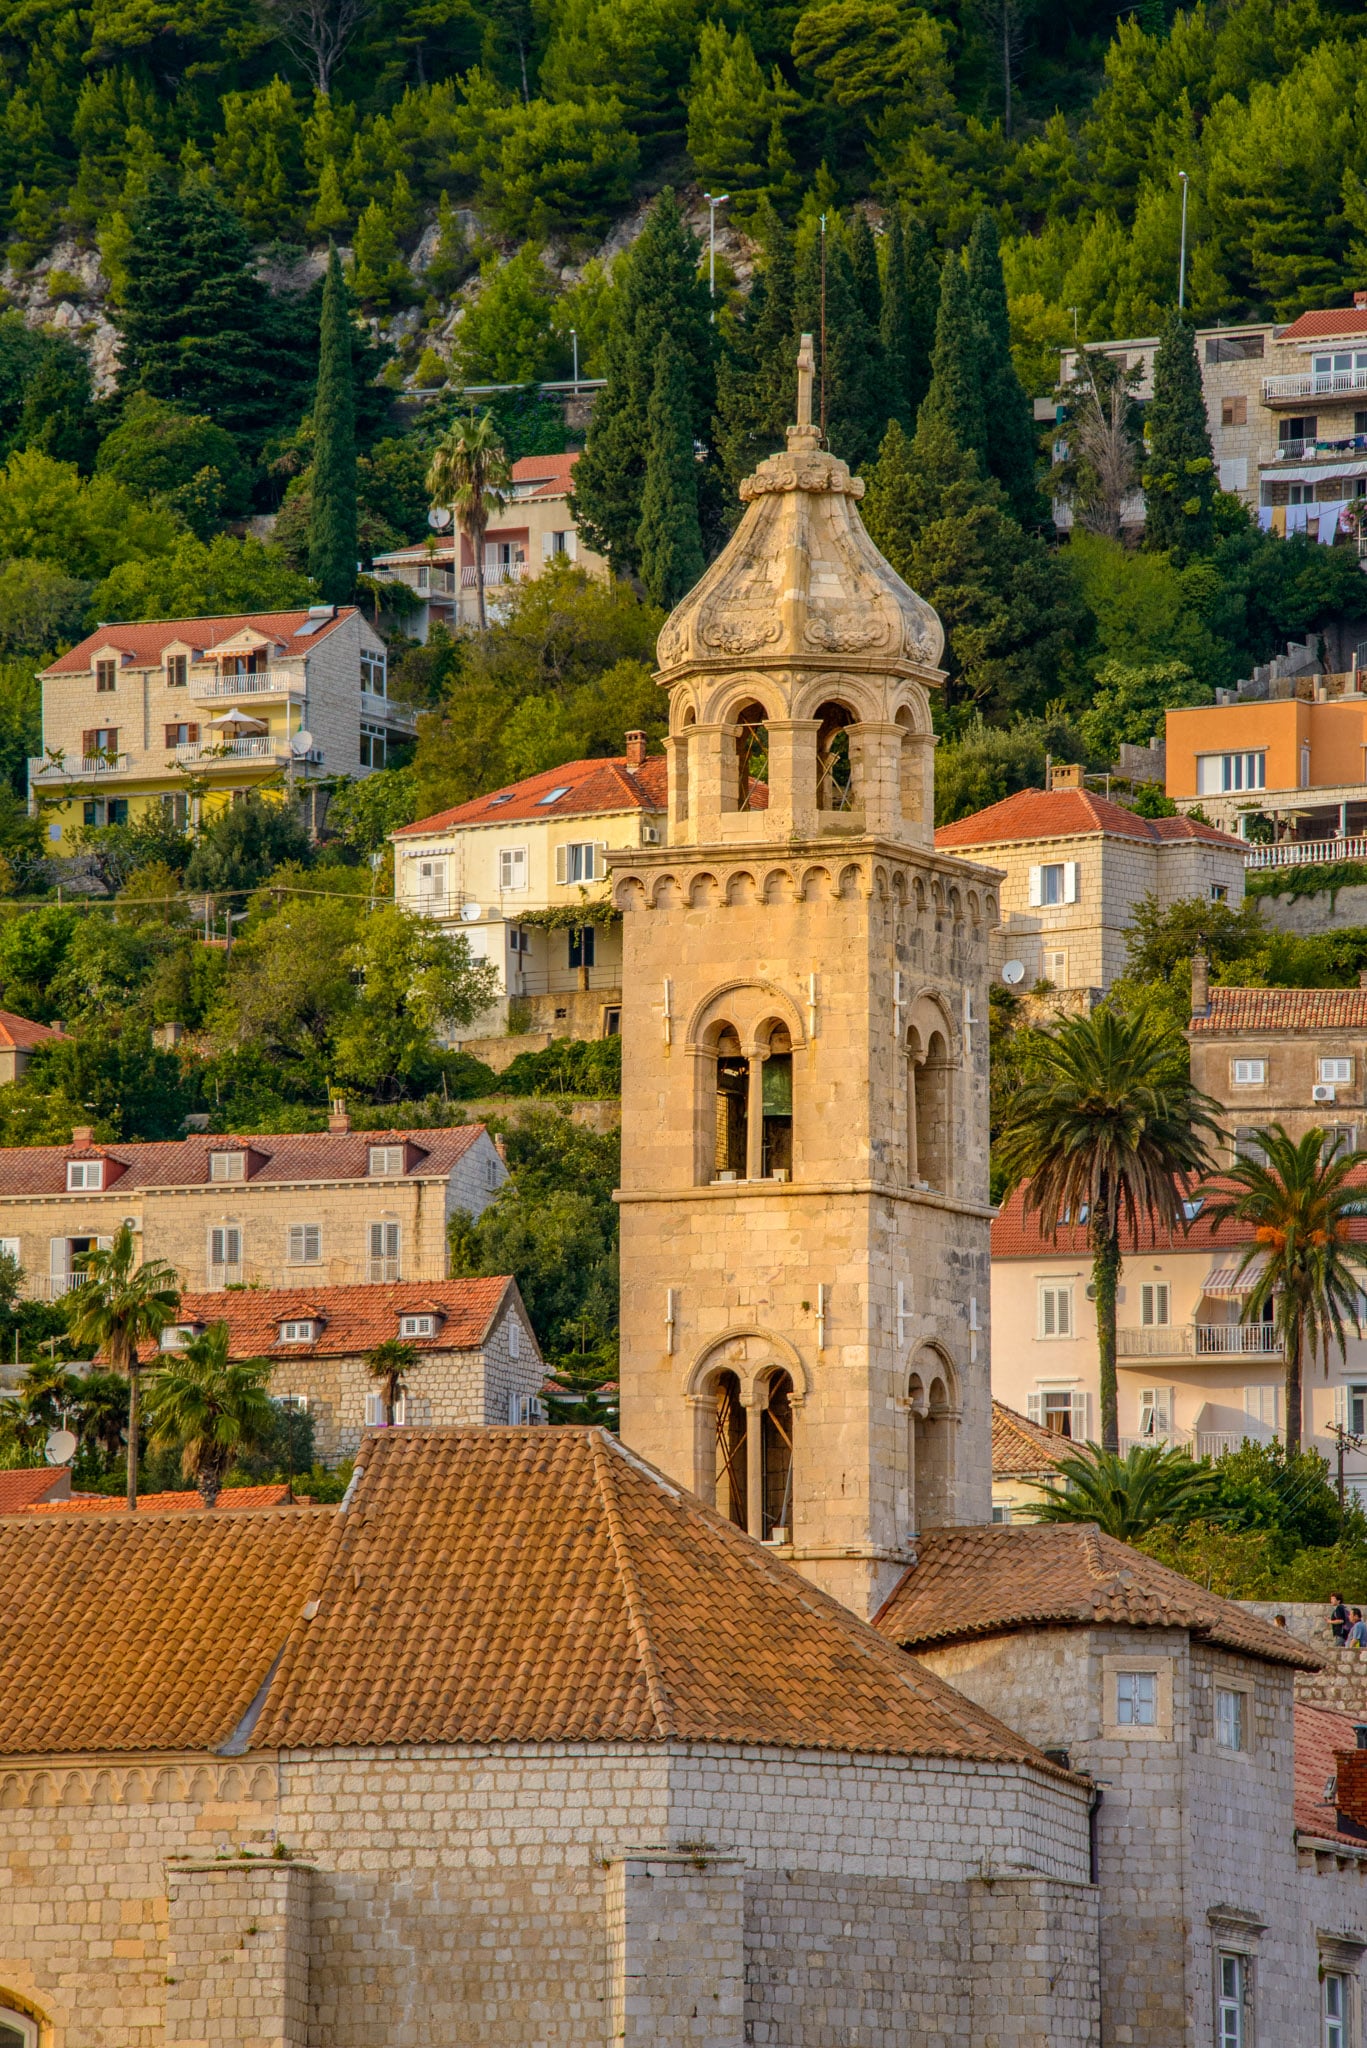 The bell tower of the Dominican Church and Monastery as seen from the wall surrounding Dubrovnik Old City in Croatia.